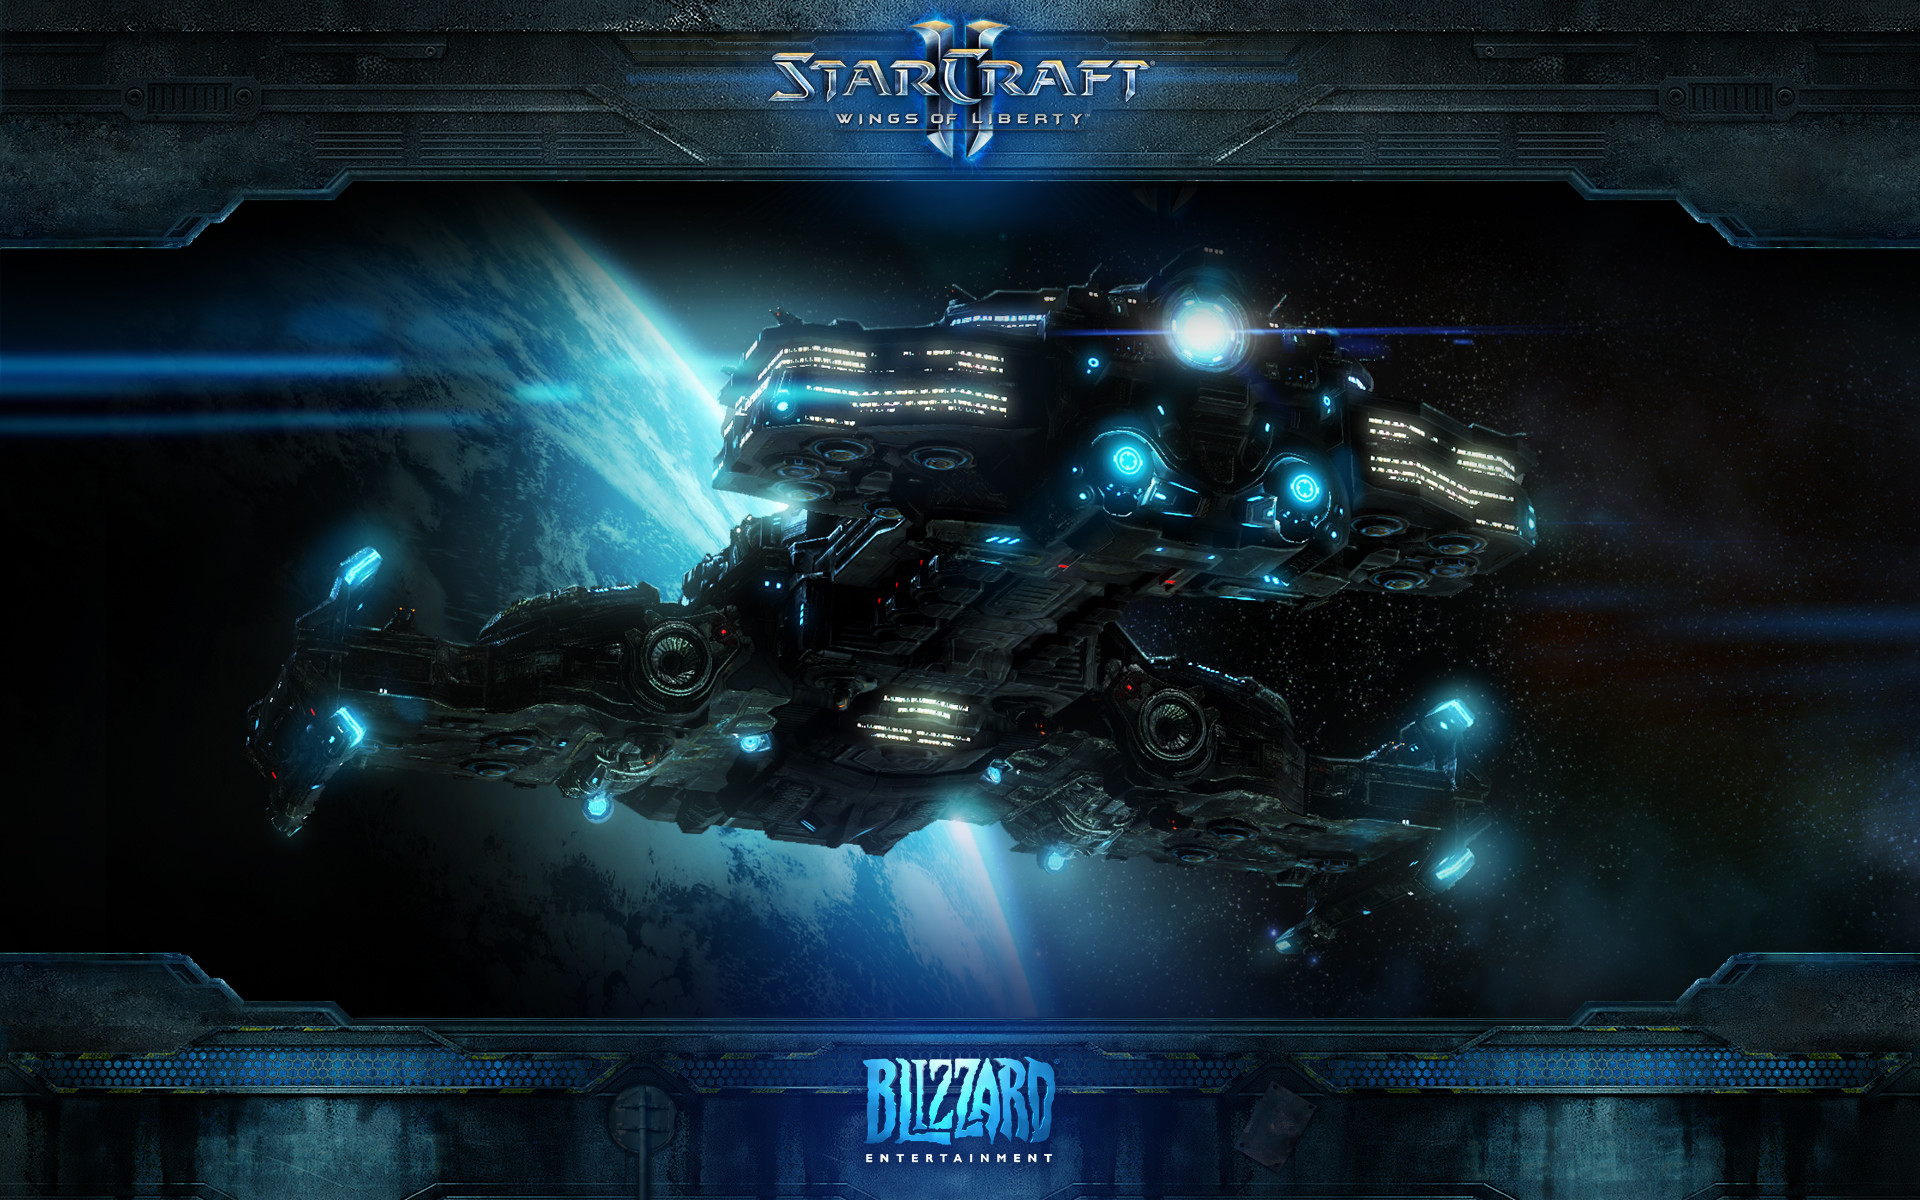 1920x1200 StarCraft Game of Thrones crossover HD Wallpaper | Wallpapers | Pinterest |  Starcraft games and Hd wallpaper